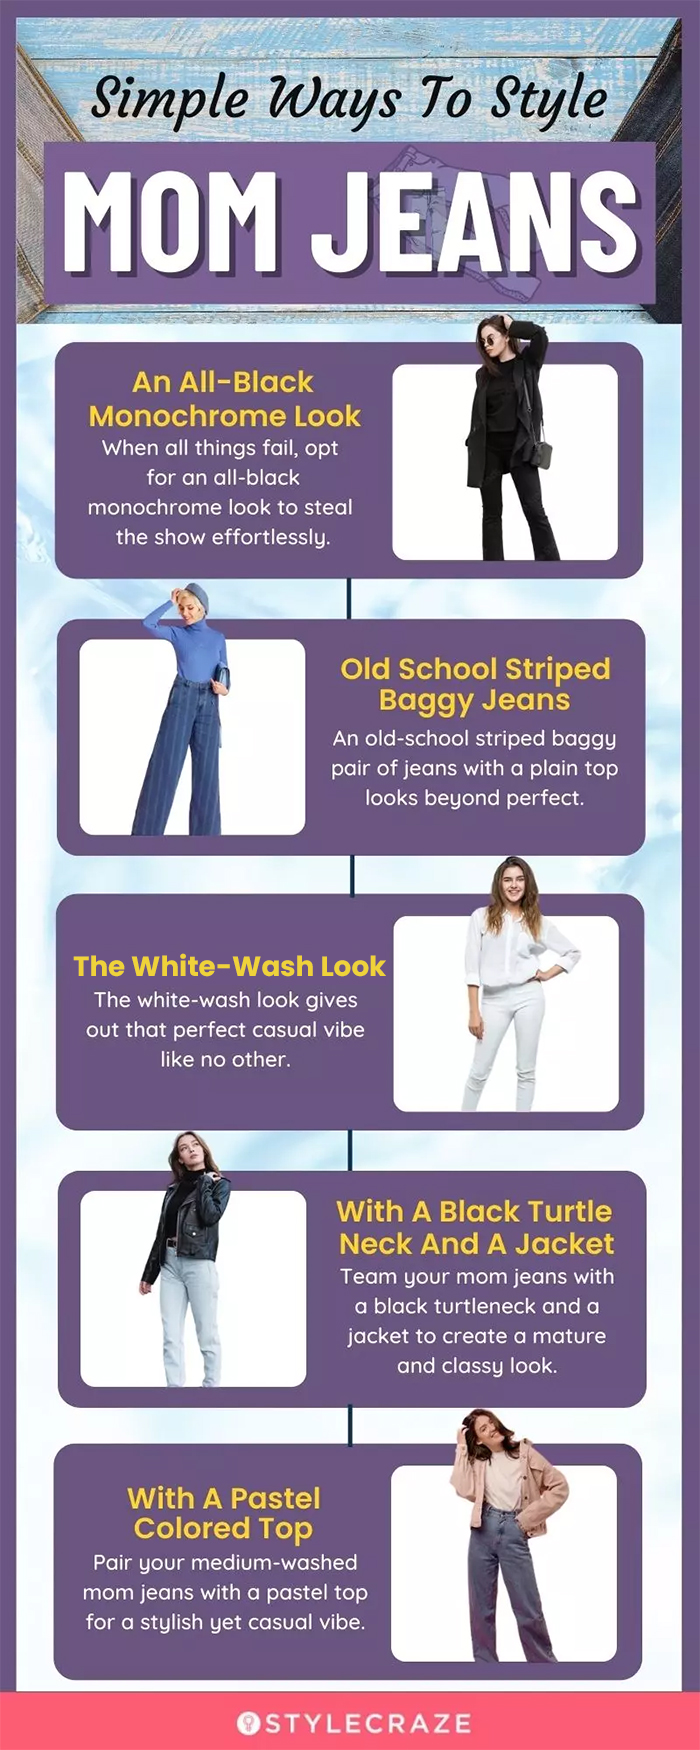 simple ways to style mom jeans (infographic)